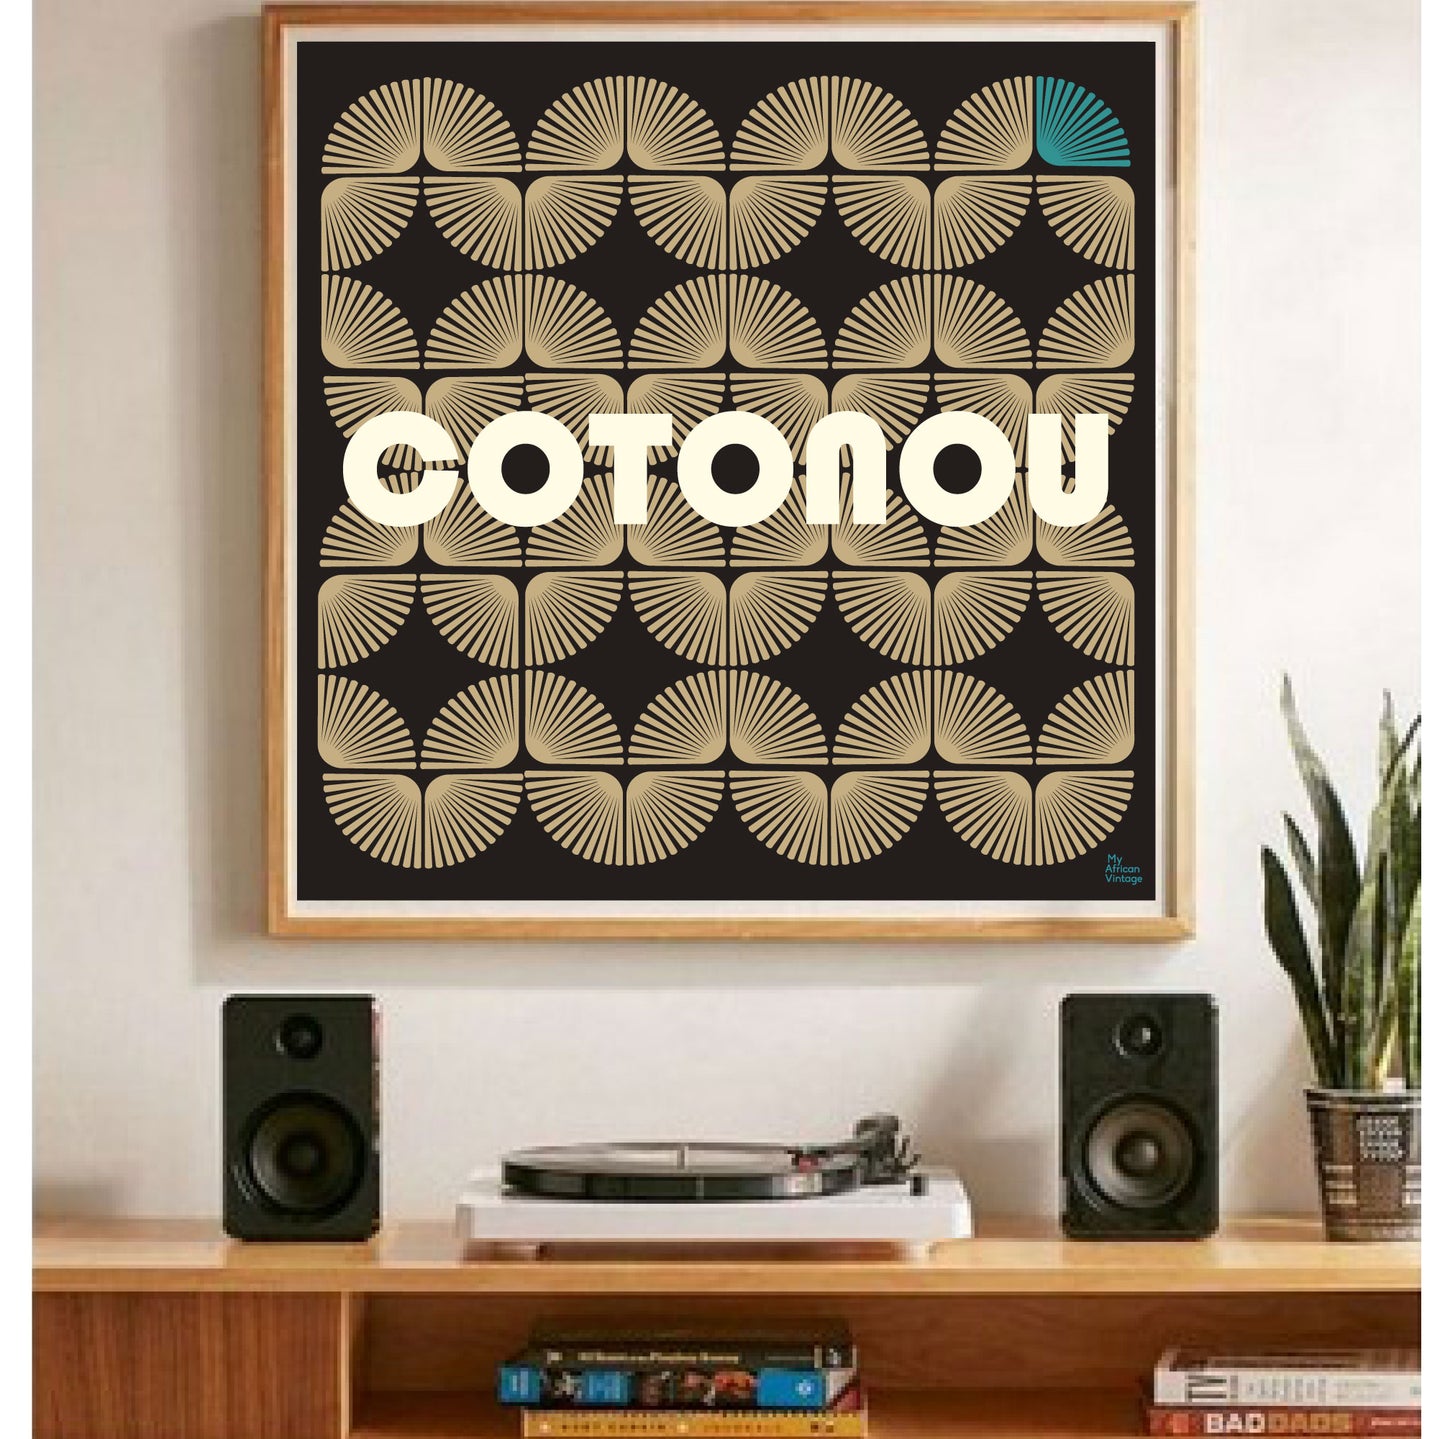 "Cotonou" retro style poster - "My African Vintage" collection